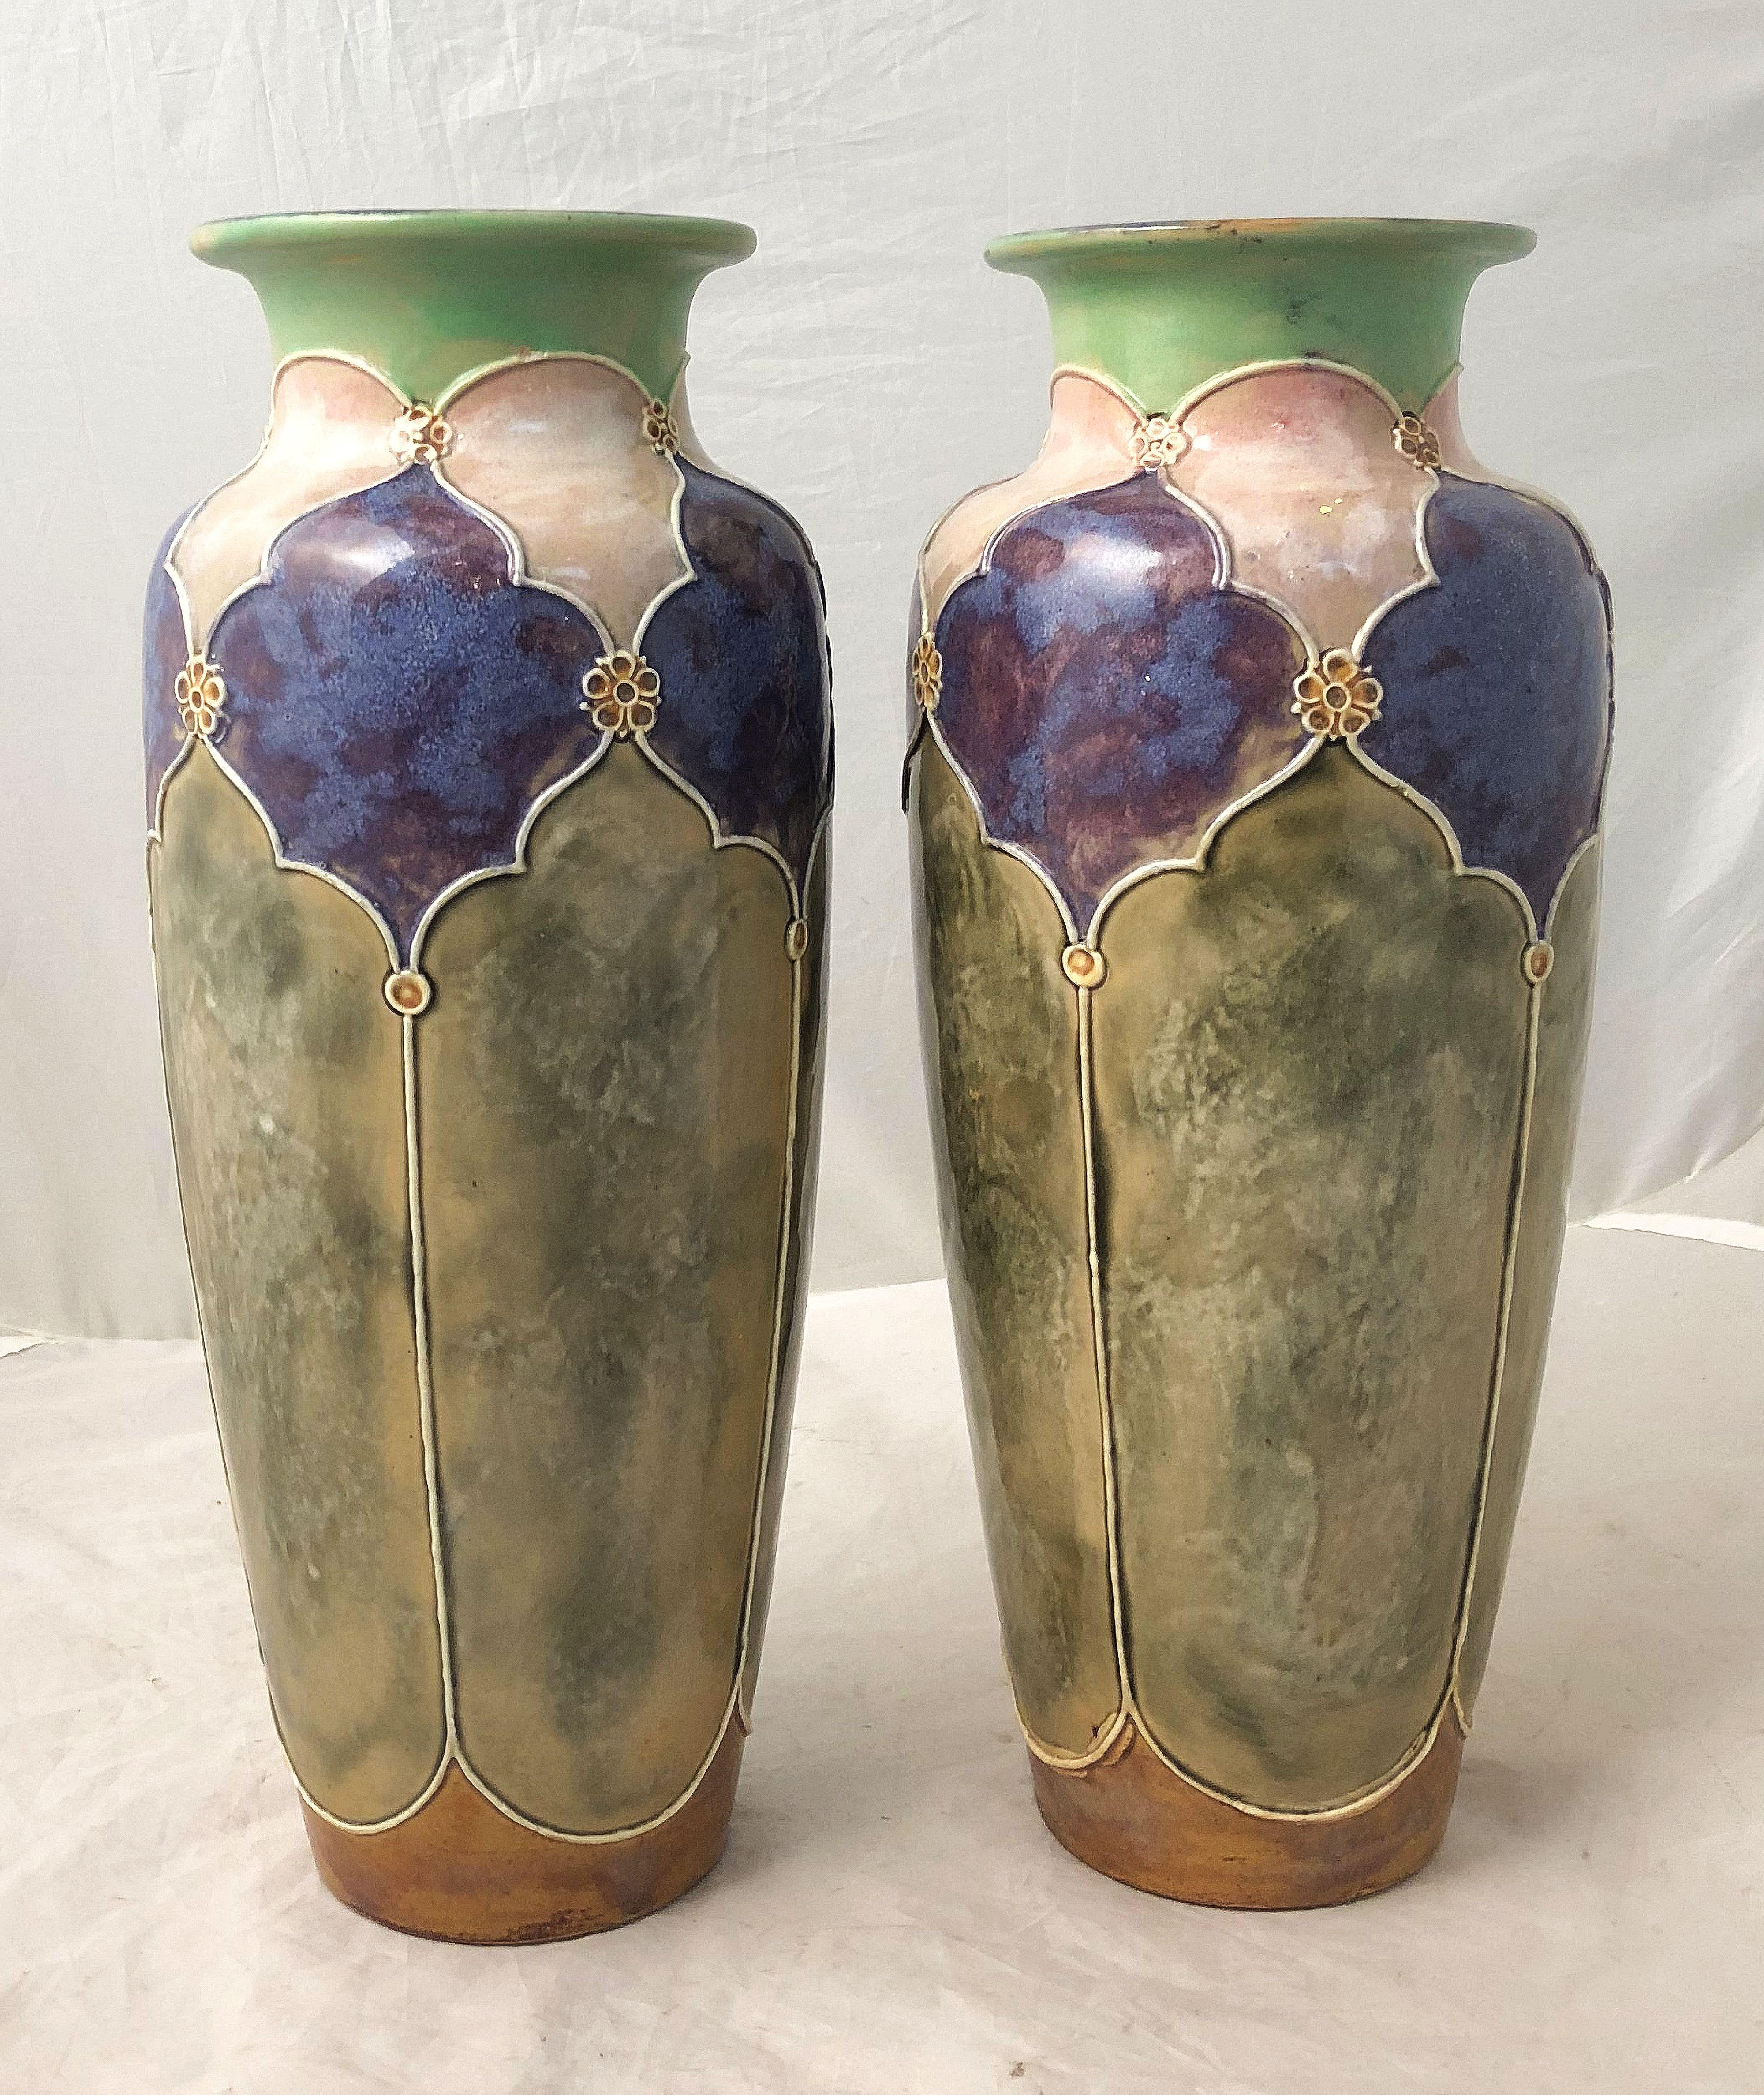 English Arts and Crafts Period Vases by Royal Doulton 'Priced as a Pair'